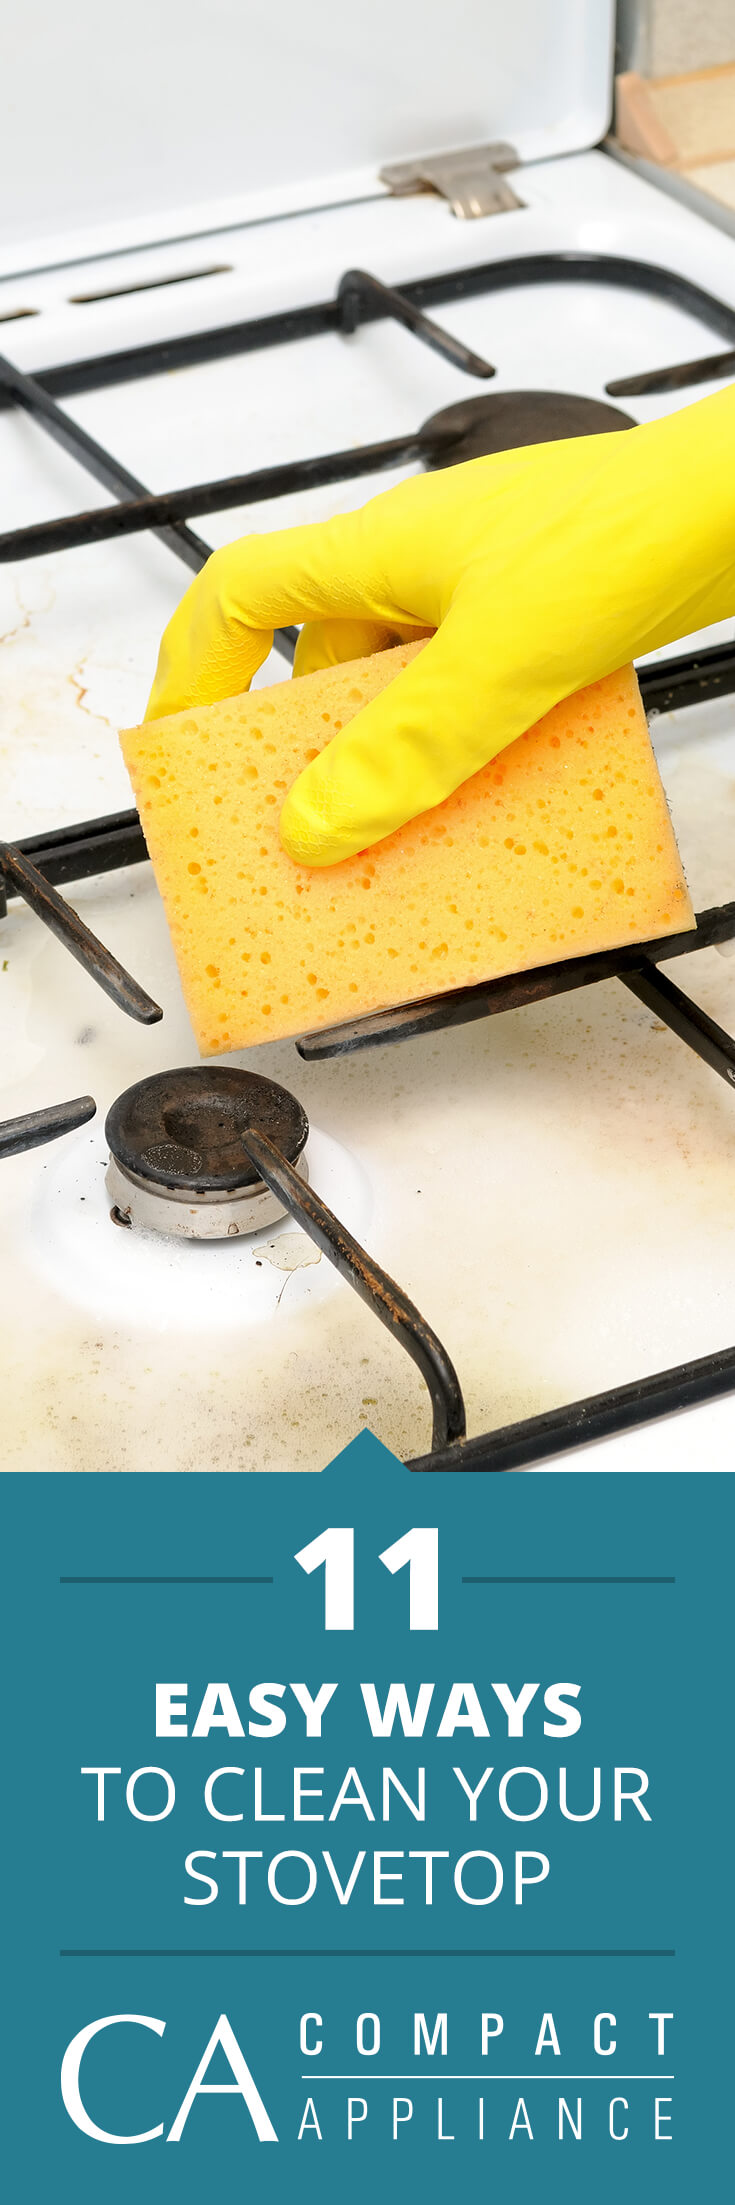 How to Easily Clean Your Stovetop